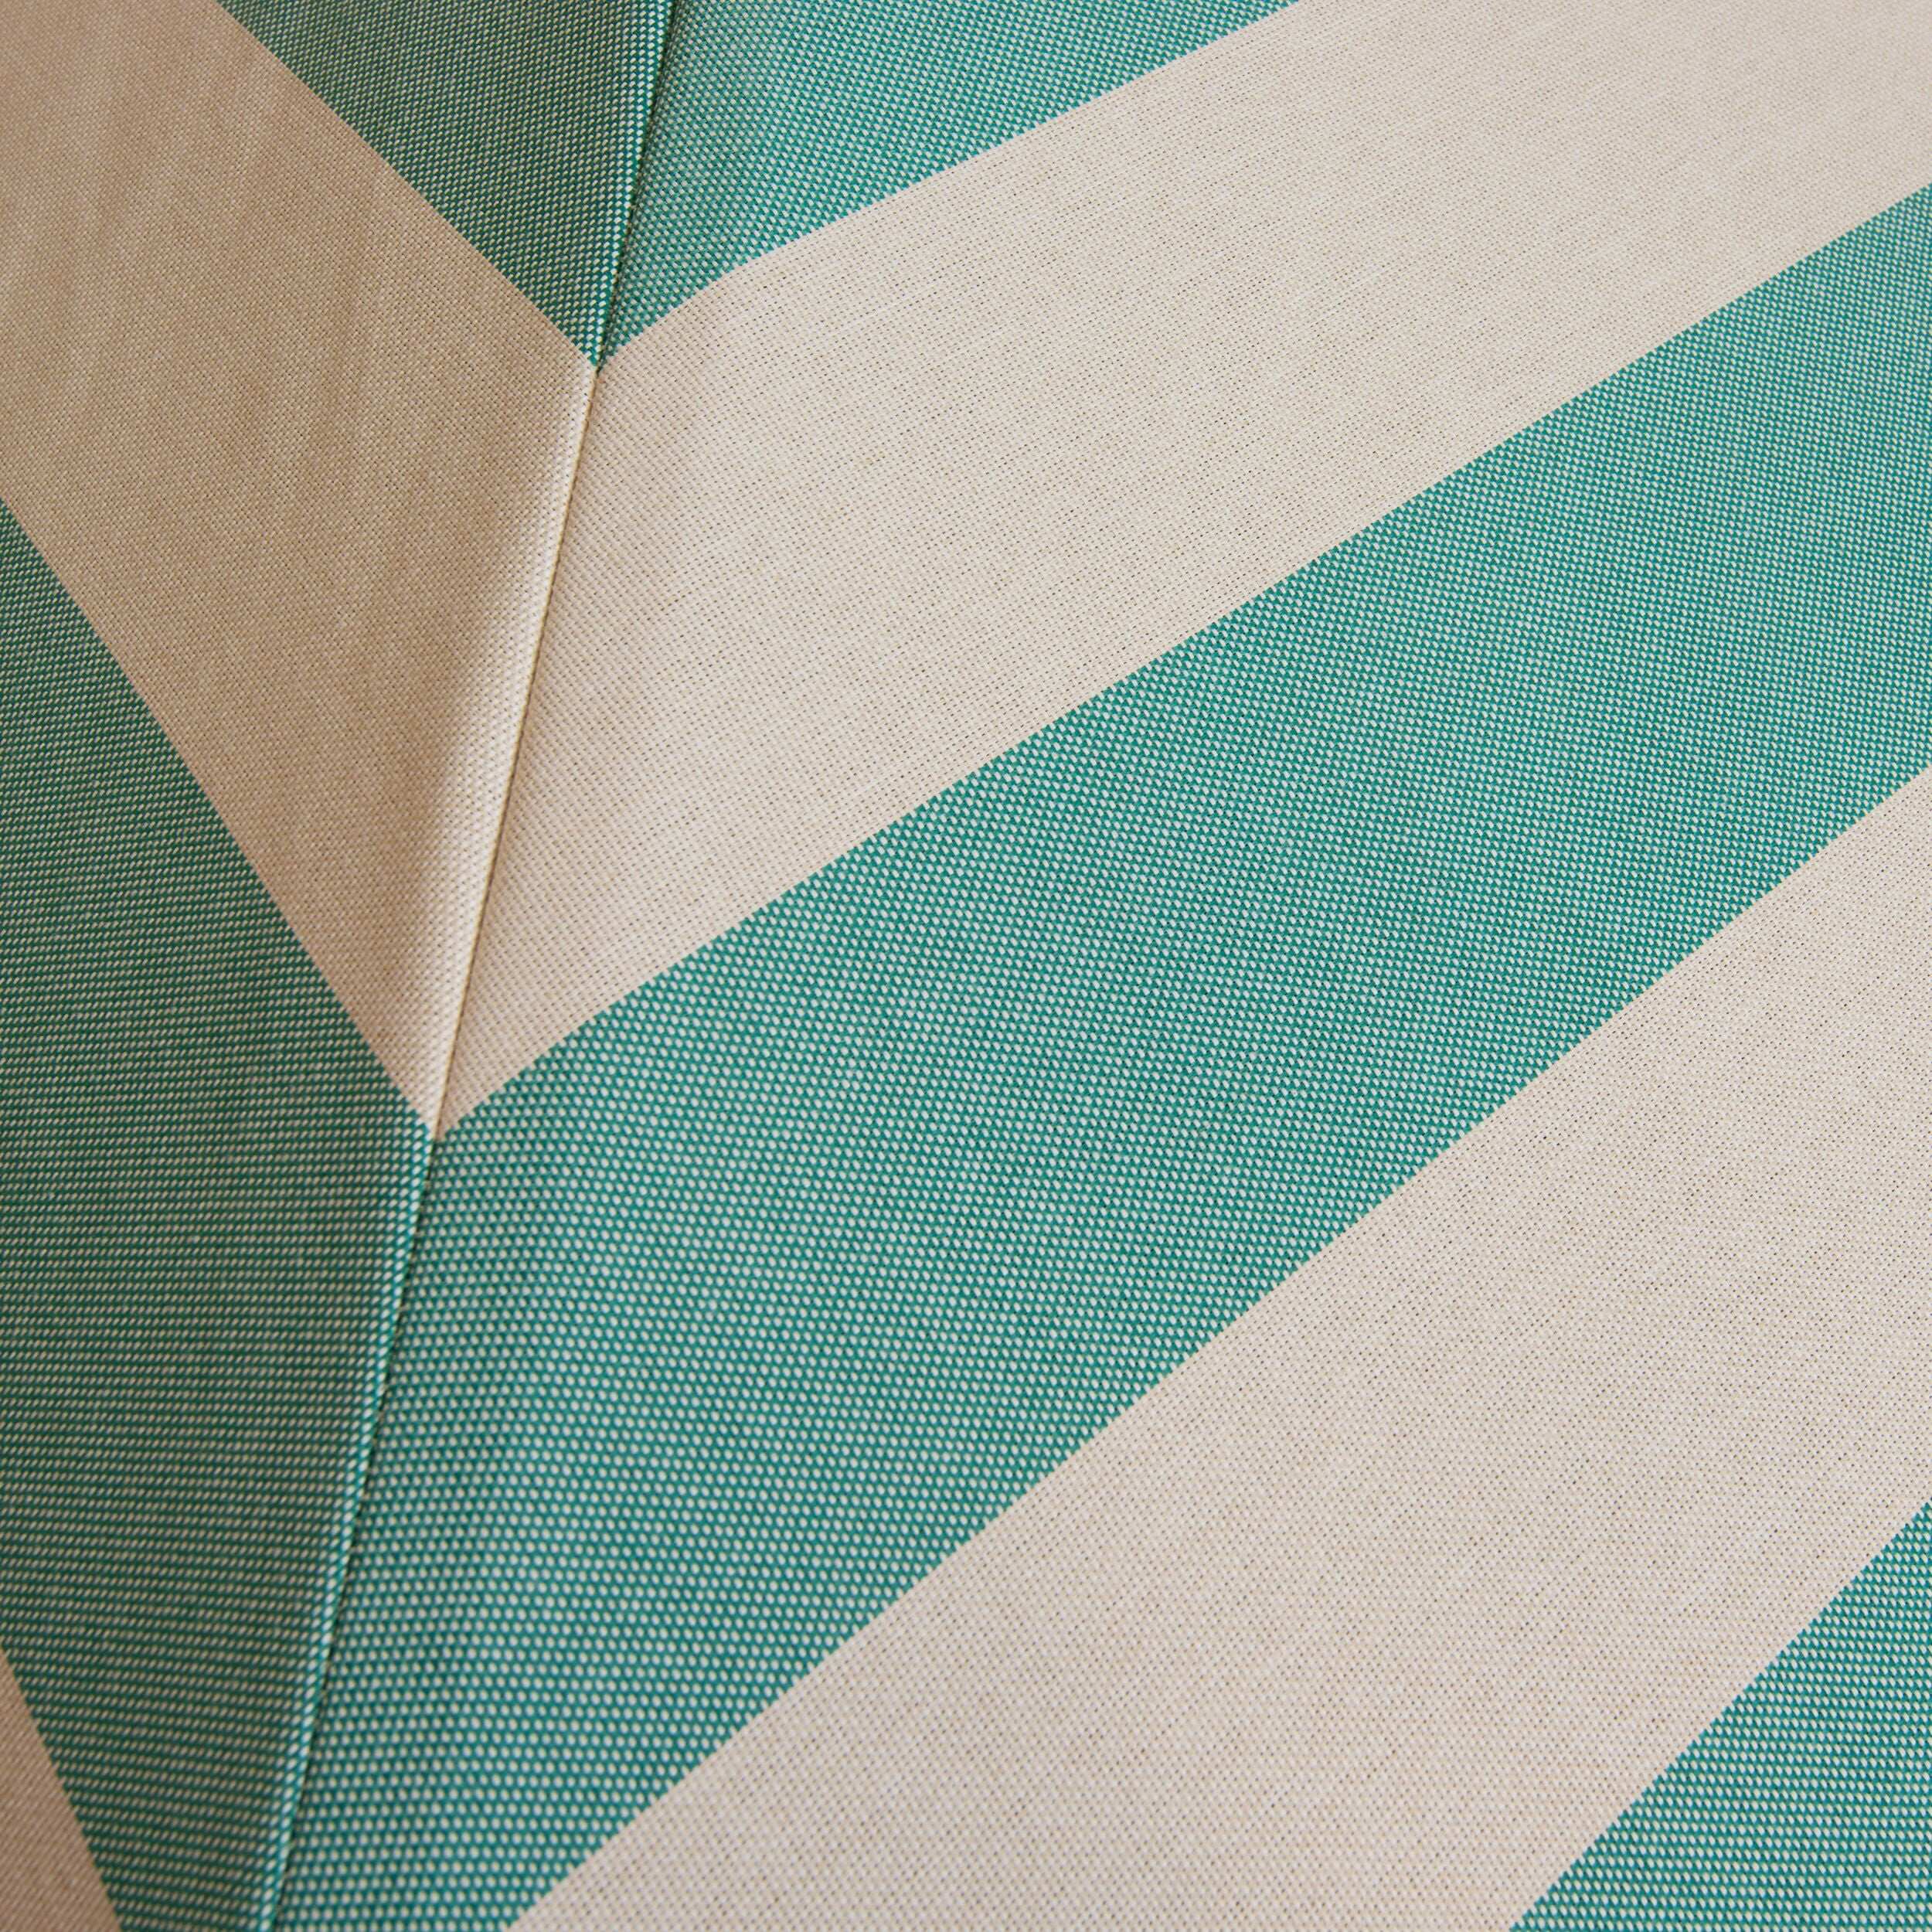 Classic Wood 6.5 ft Square Market Umbrella in Soft Teal and Ivory Stripe